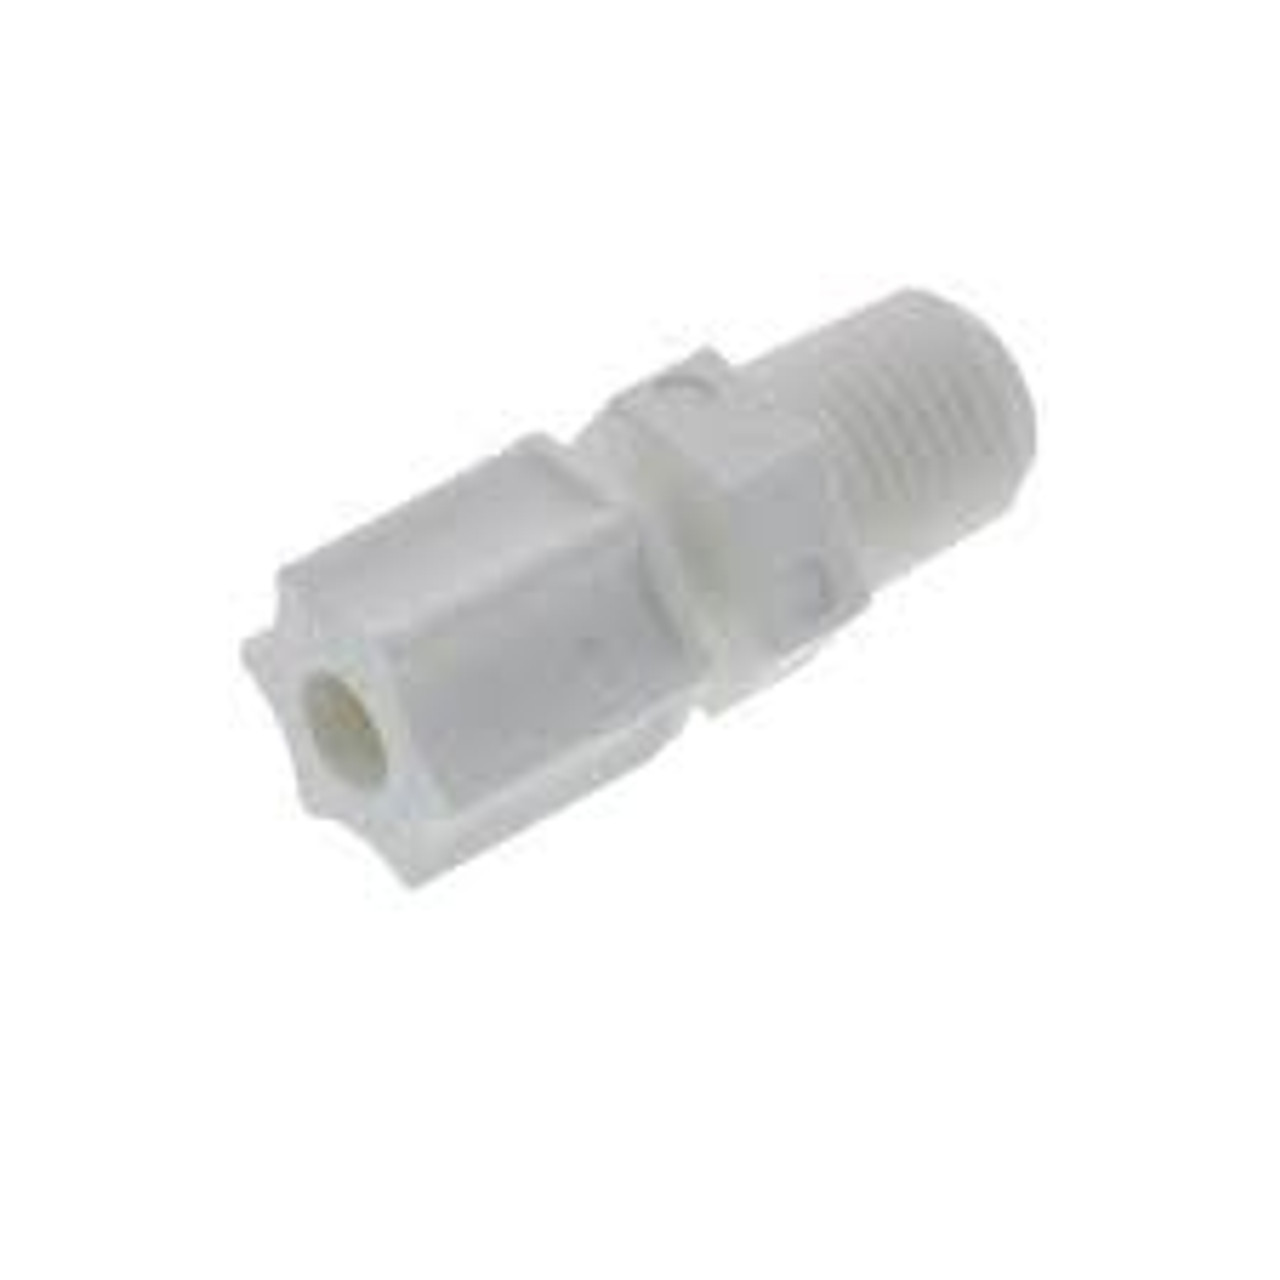 Jaco 3/8" Connector Compr Tube x MPT PP Plast